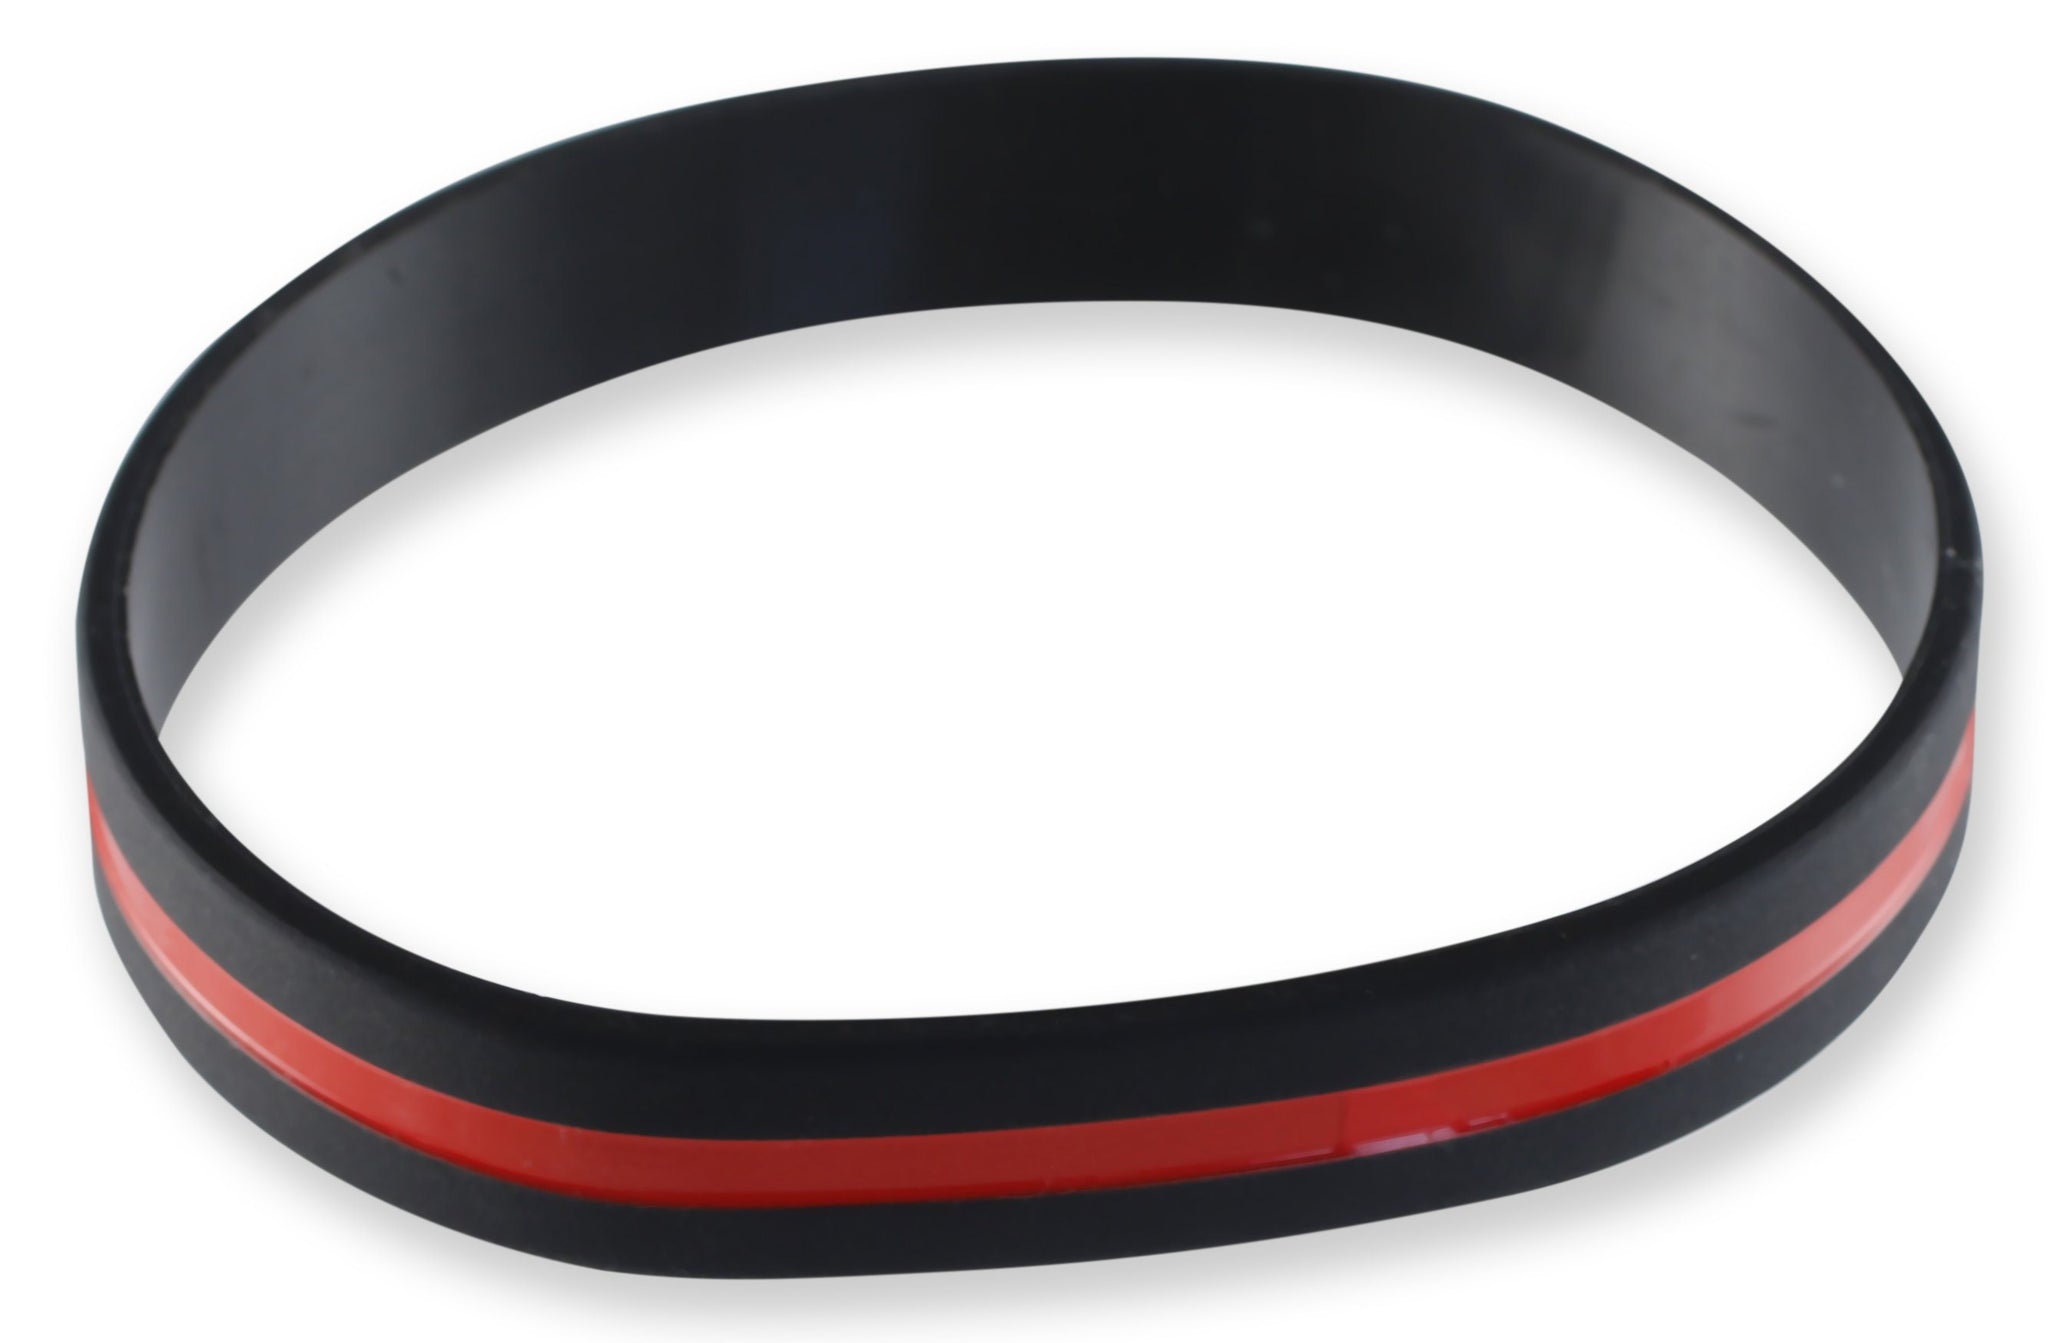 Firefighter Awareness Thin Red Line Silicone Wristband Bracelets Wristband WizardPins 50 Wristbands 